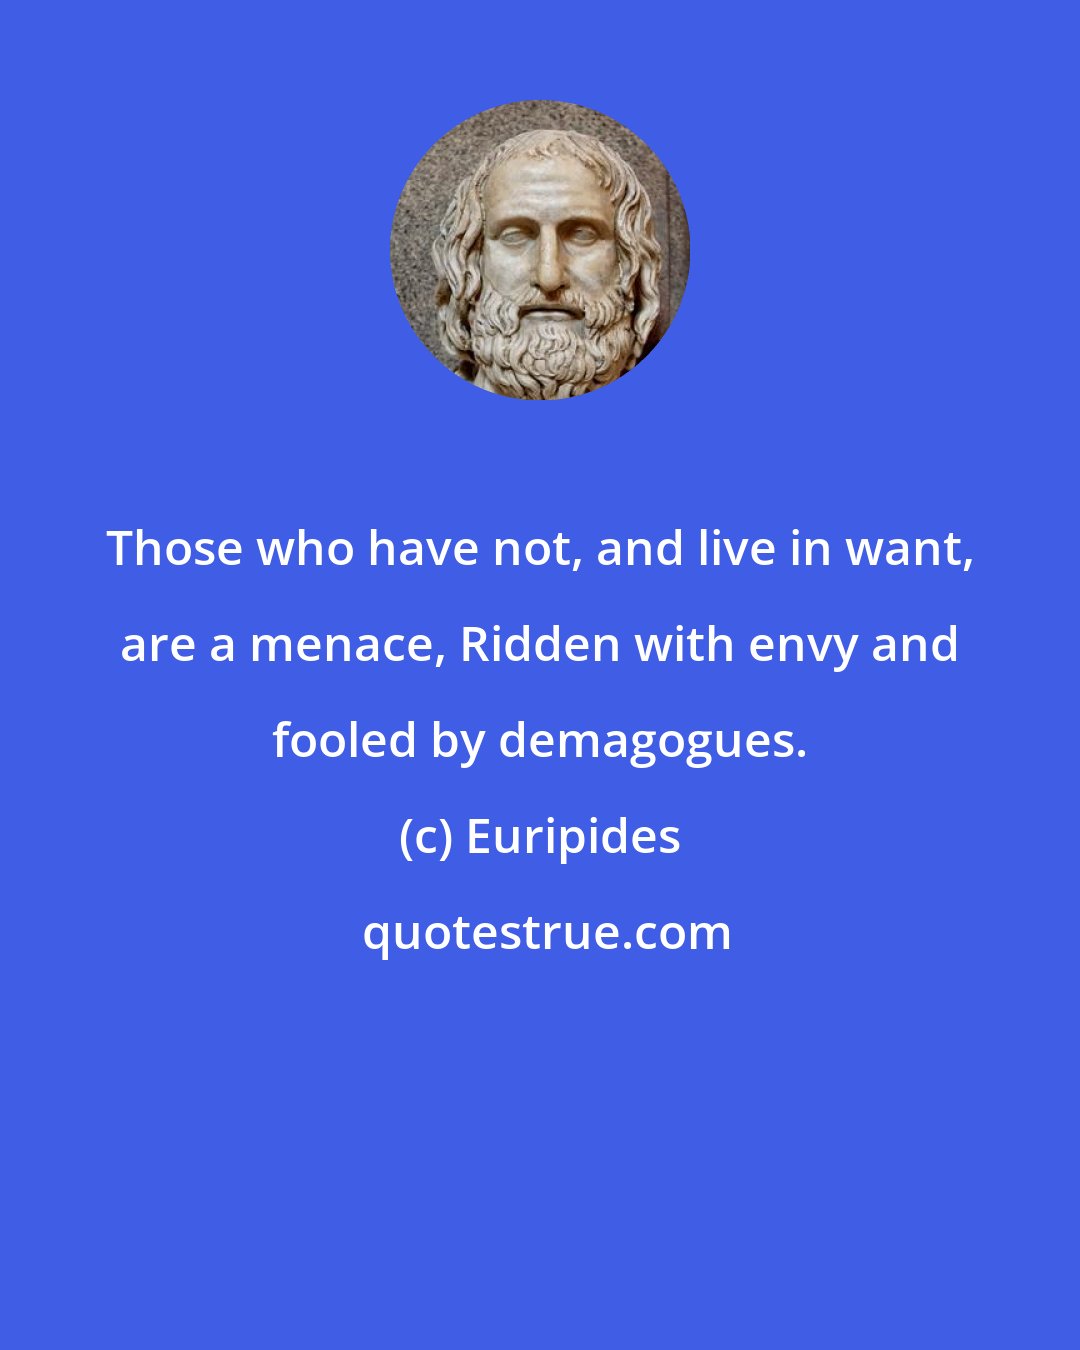 Euripides: Those who have not, and live in want, are a menace, Ridden with envy and fooled by demagogues.